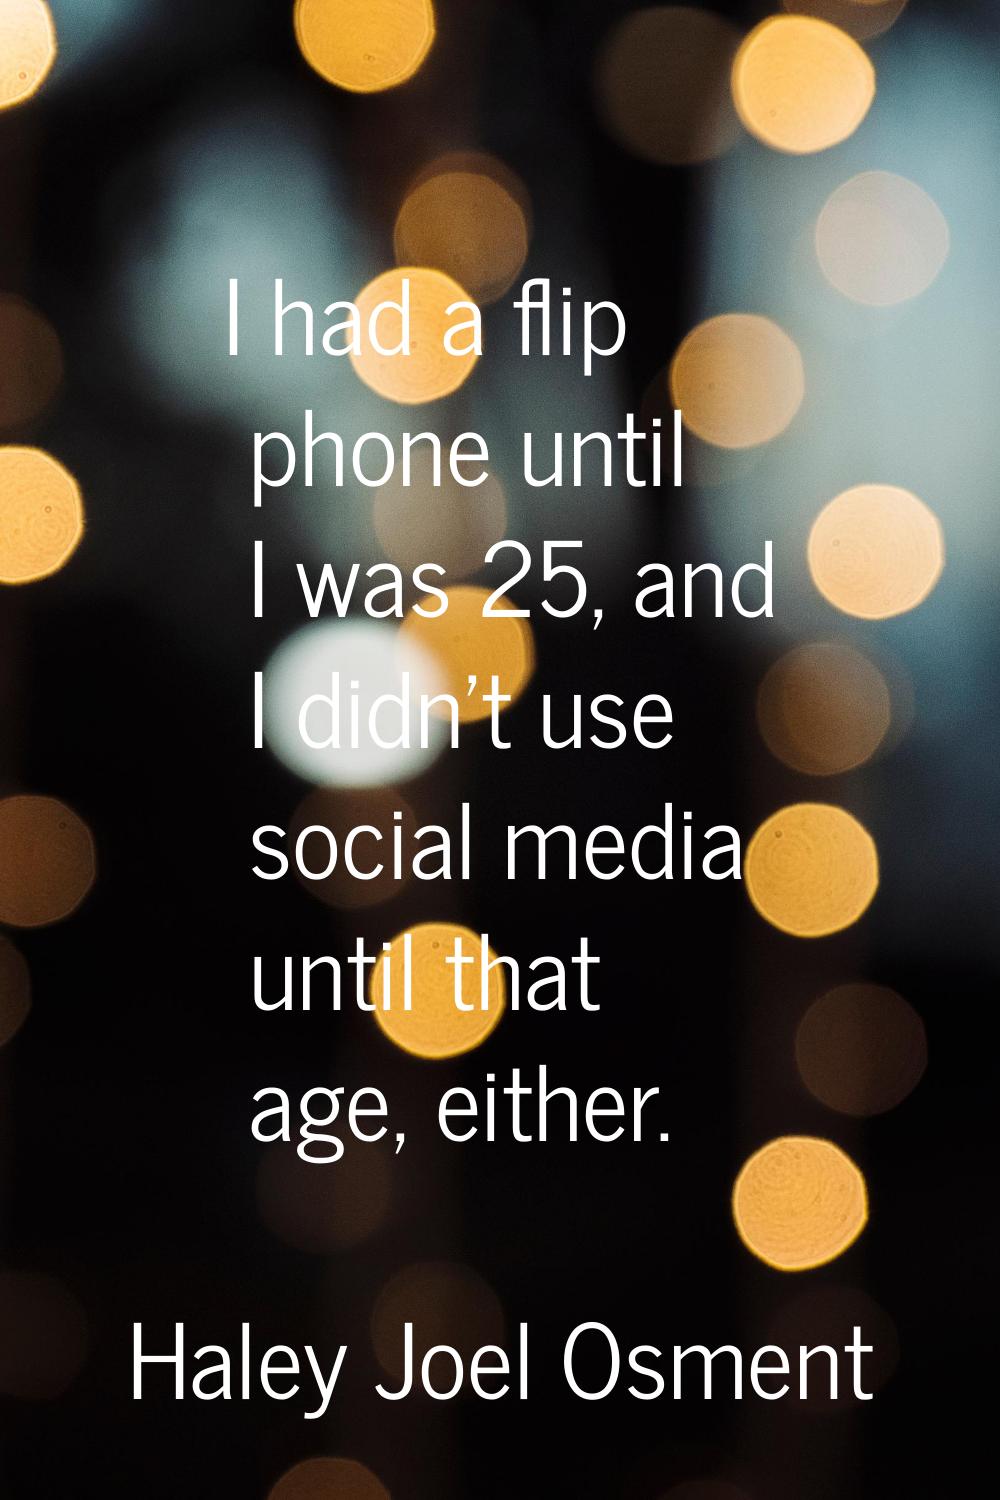 I had a flip phone until I was 25, and I didn't use social media until that age, either.